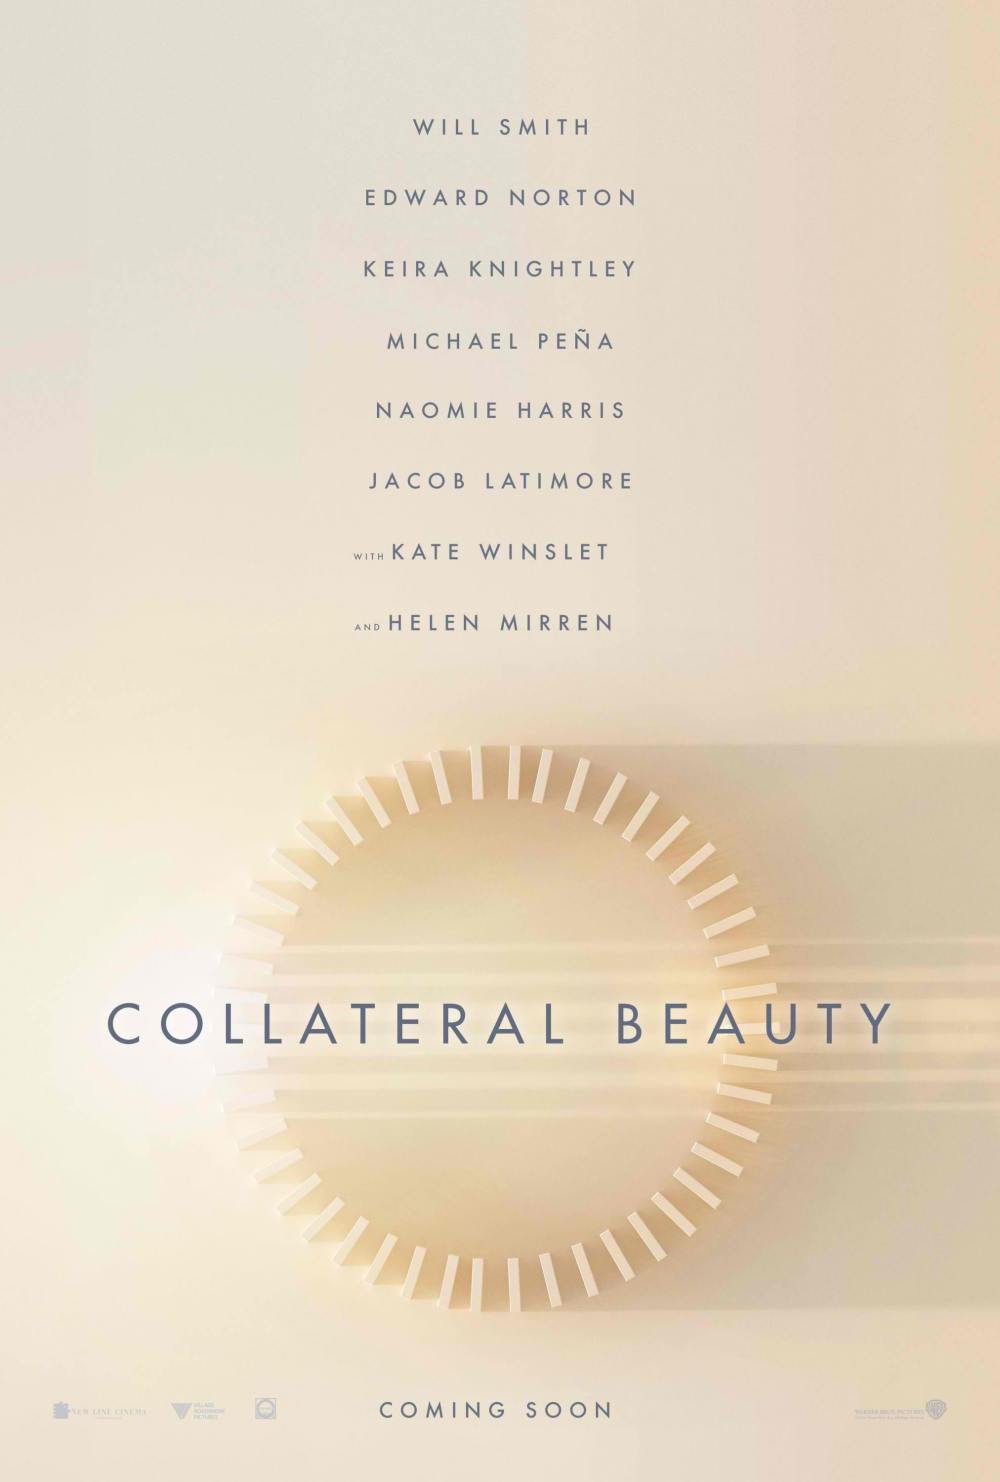 086 - Collateral Beauty